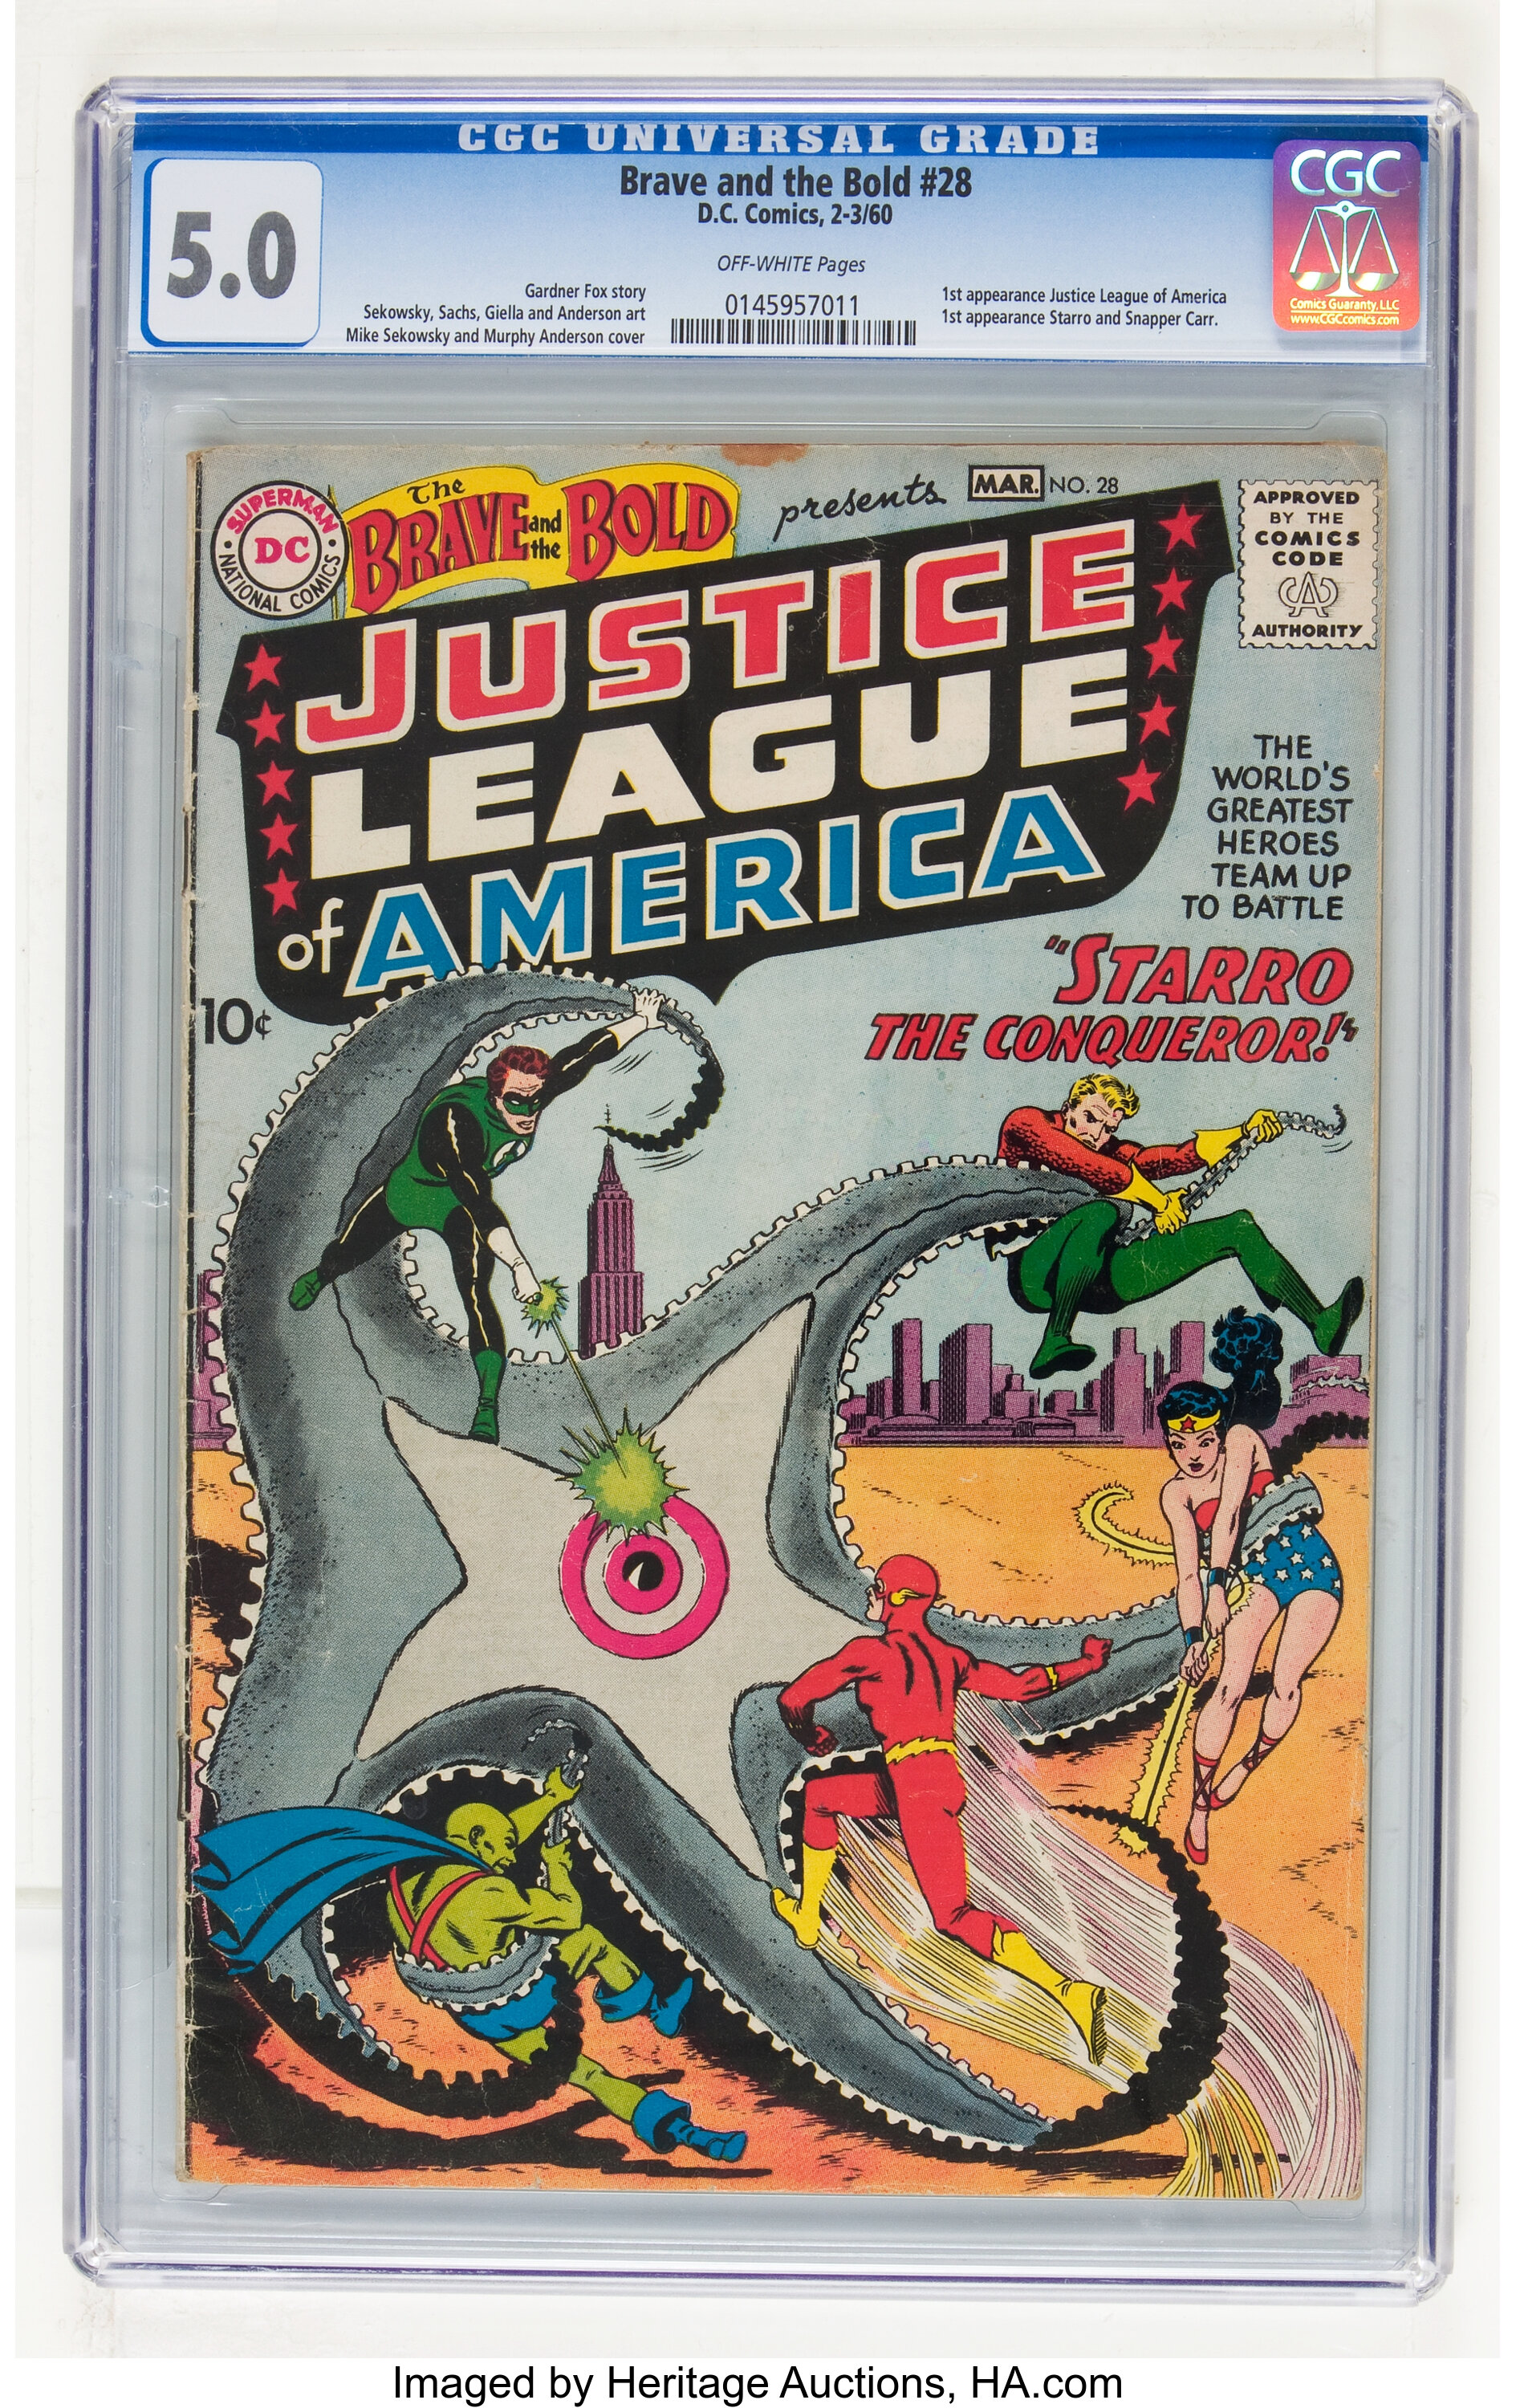 The Brave and the Bold #28 Justice League of America (DC, 1960